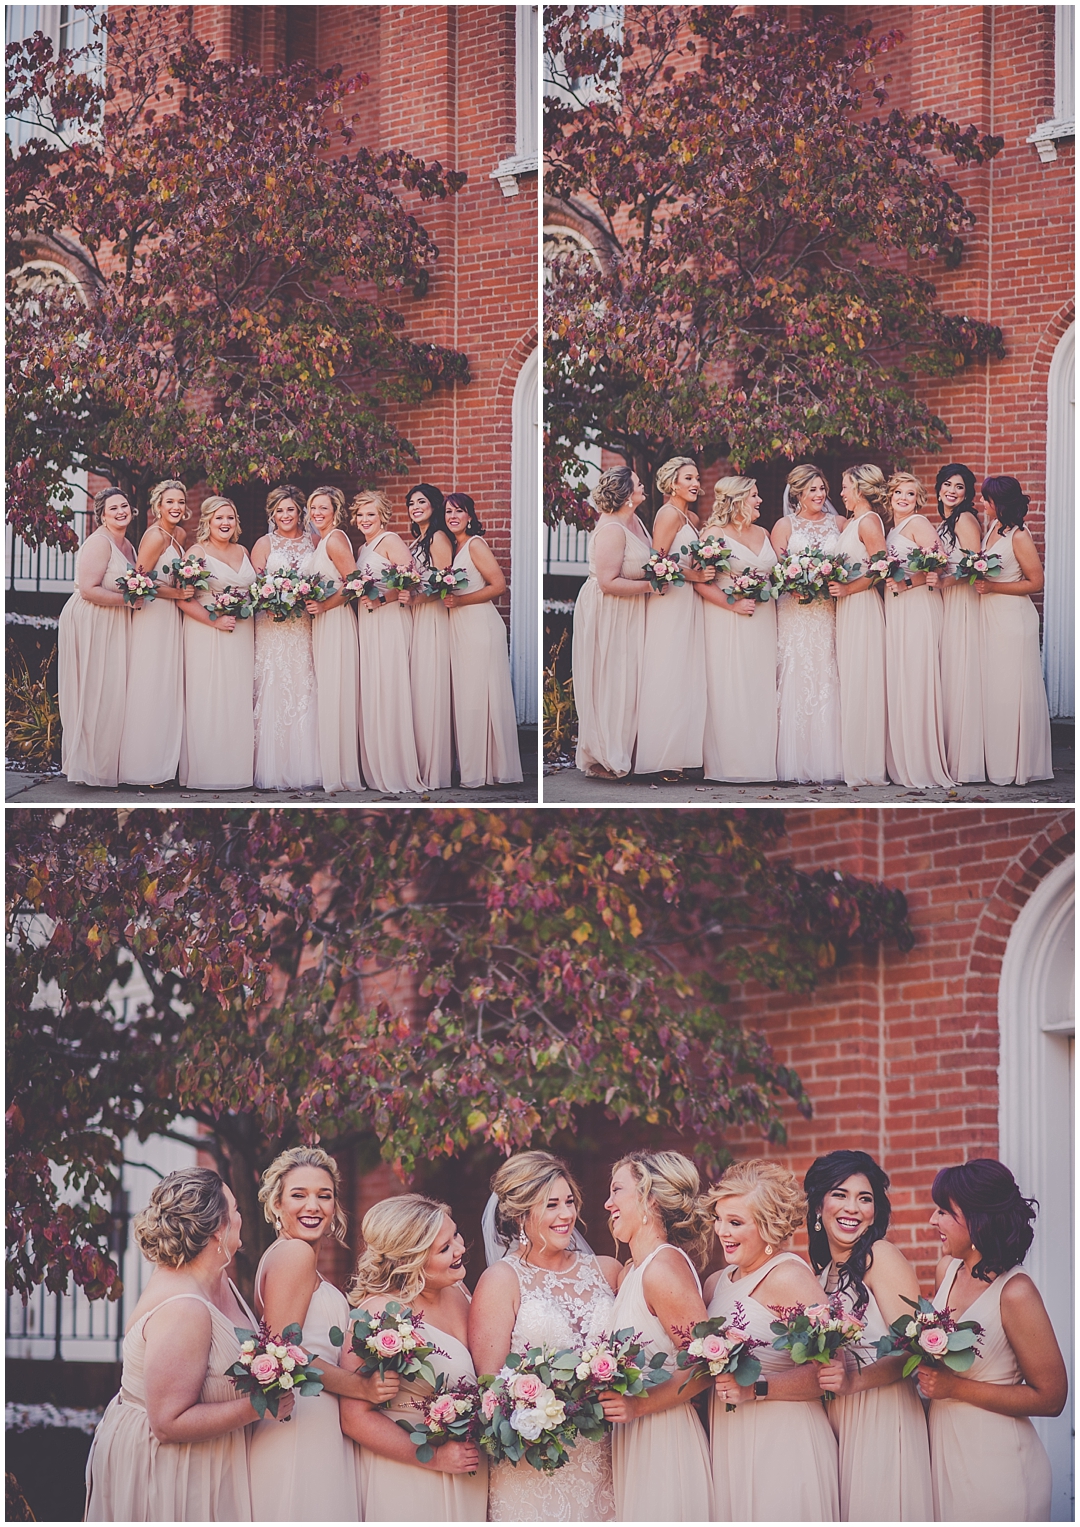 November fall wedding day at Annie Merner Chapel with wedding photos at Illinois College in Jacksonville, Illinois - blush pink and navy fall wedding day.